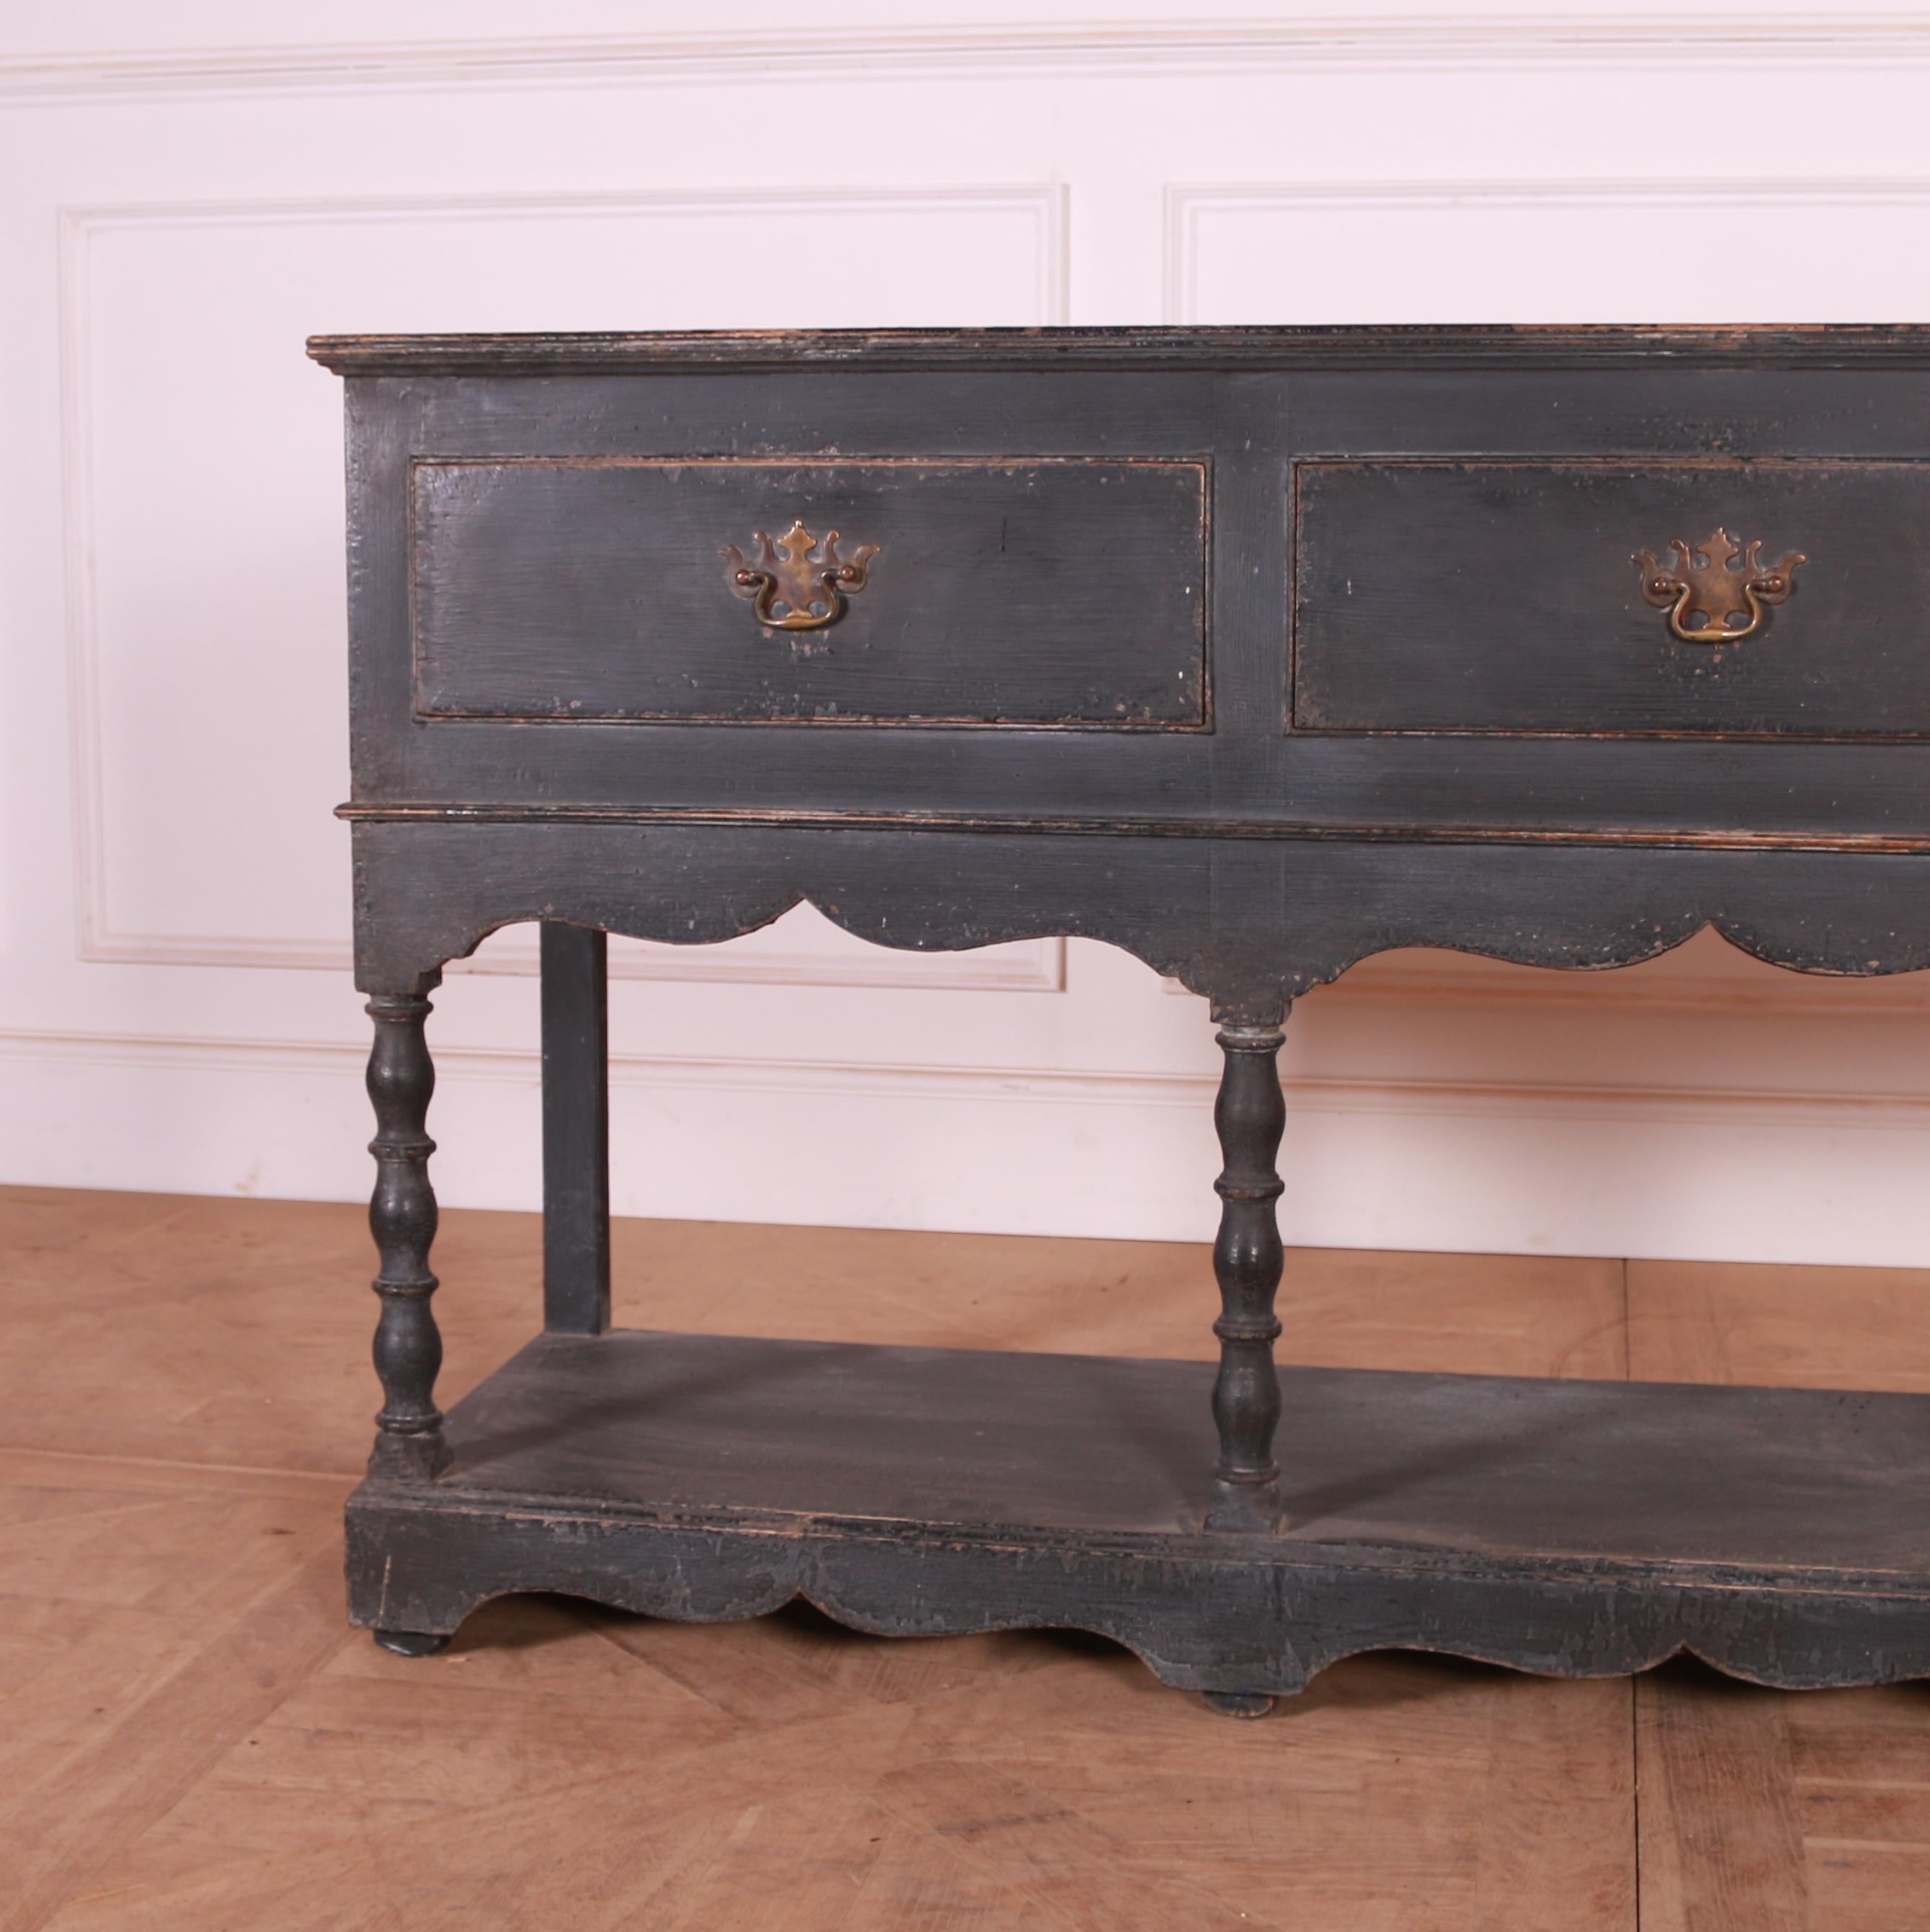 19th Century English painted oak three drawer dresser base. 1880.

Reference: 7747

Dimensions
67 inches (170 cms) wide
17.5 inches (44 cms) deep
33 inches (84 cms) high.

